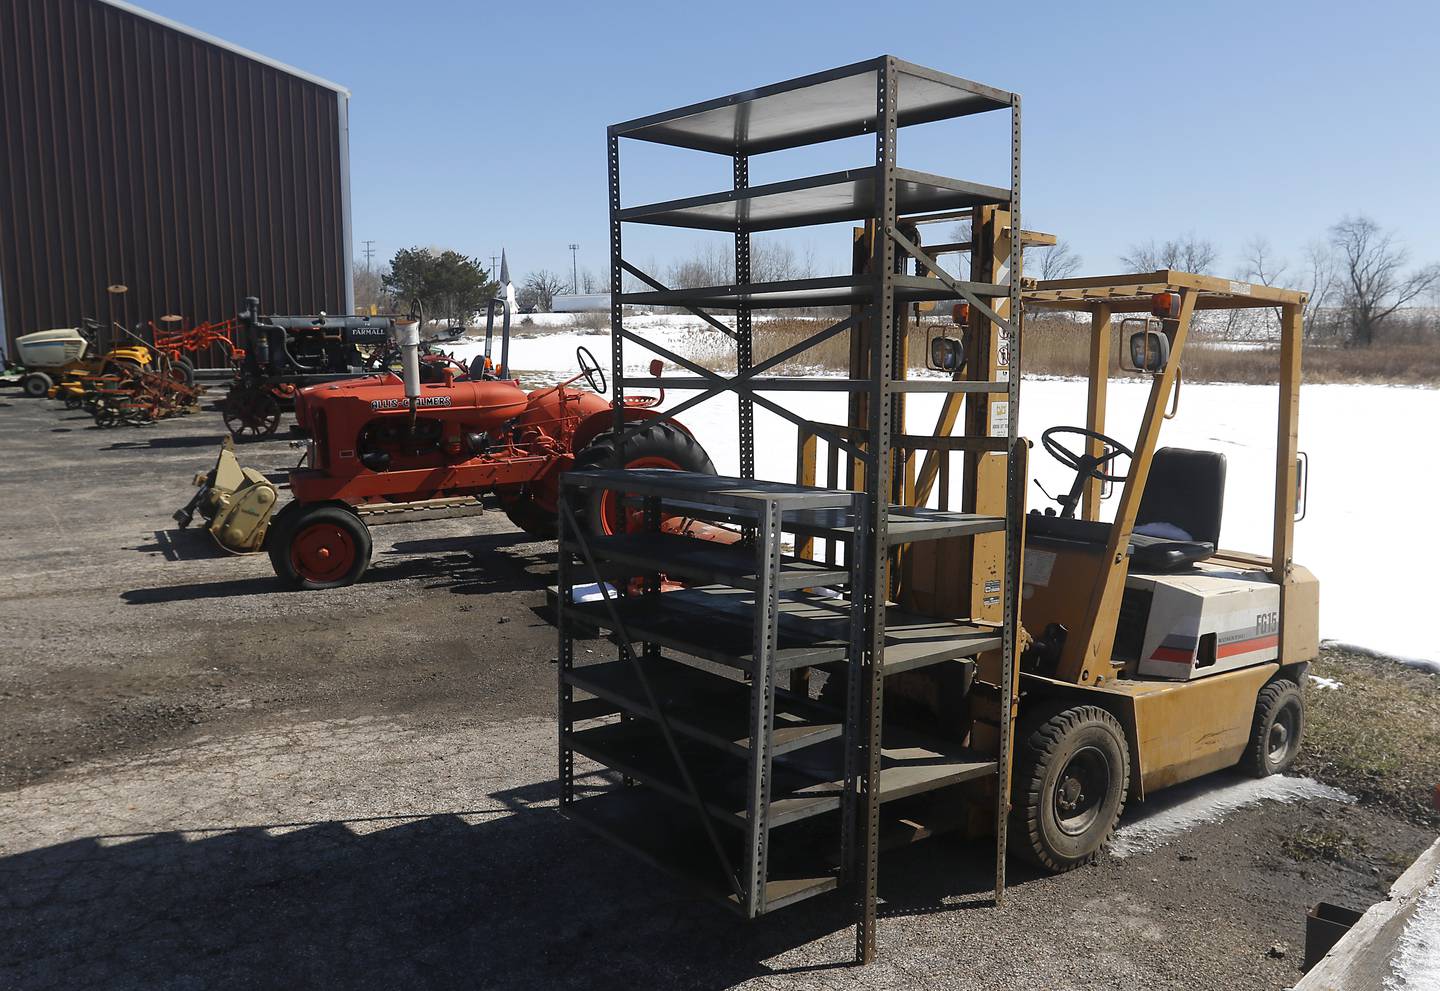 Equipment outside B&K Power Equipment in Marengo on Tuesday, March 14, 2023, that will be auctioned off in April. Owner Barbara Christ has decided to close the business after 53 years. It was one of the last independent farm and construction machinery shops in the area.